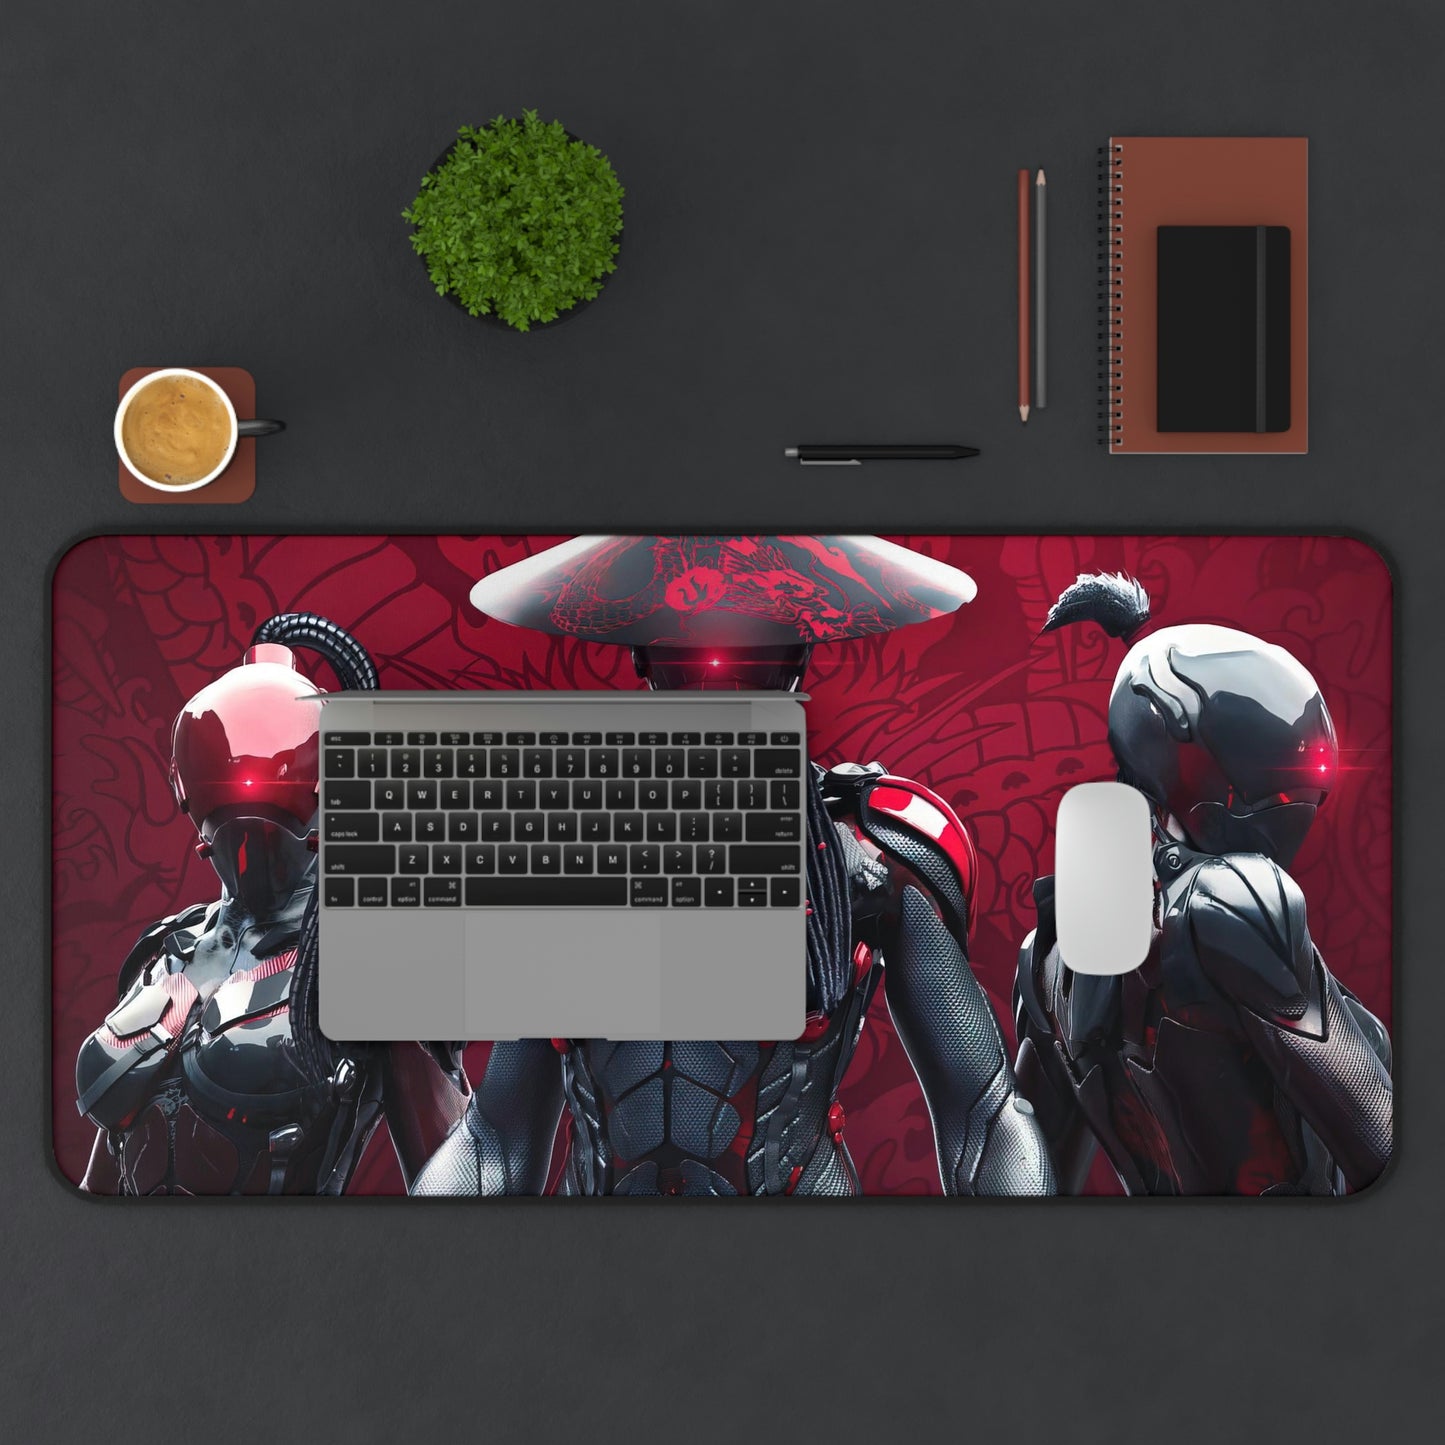 Cyberpunk Warrior Gaming Mouse Pad